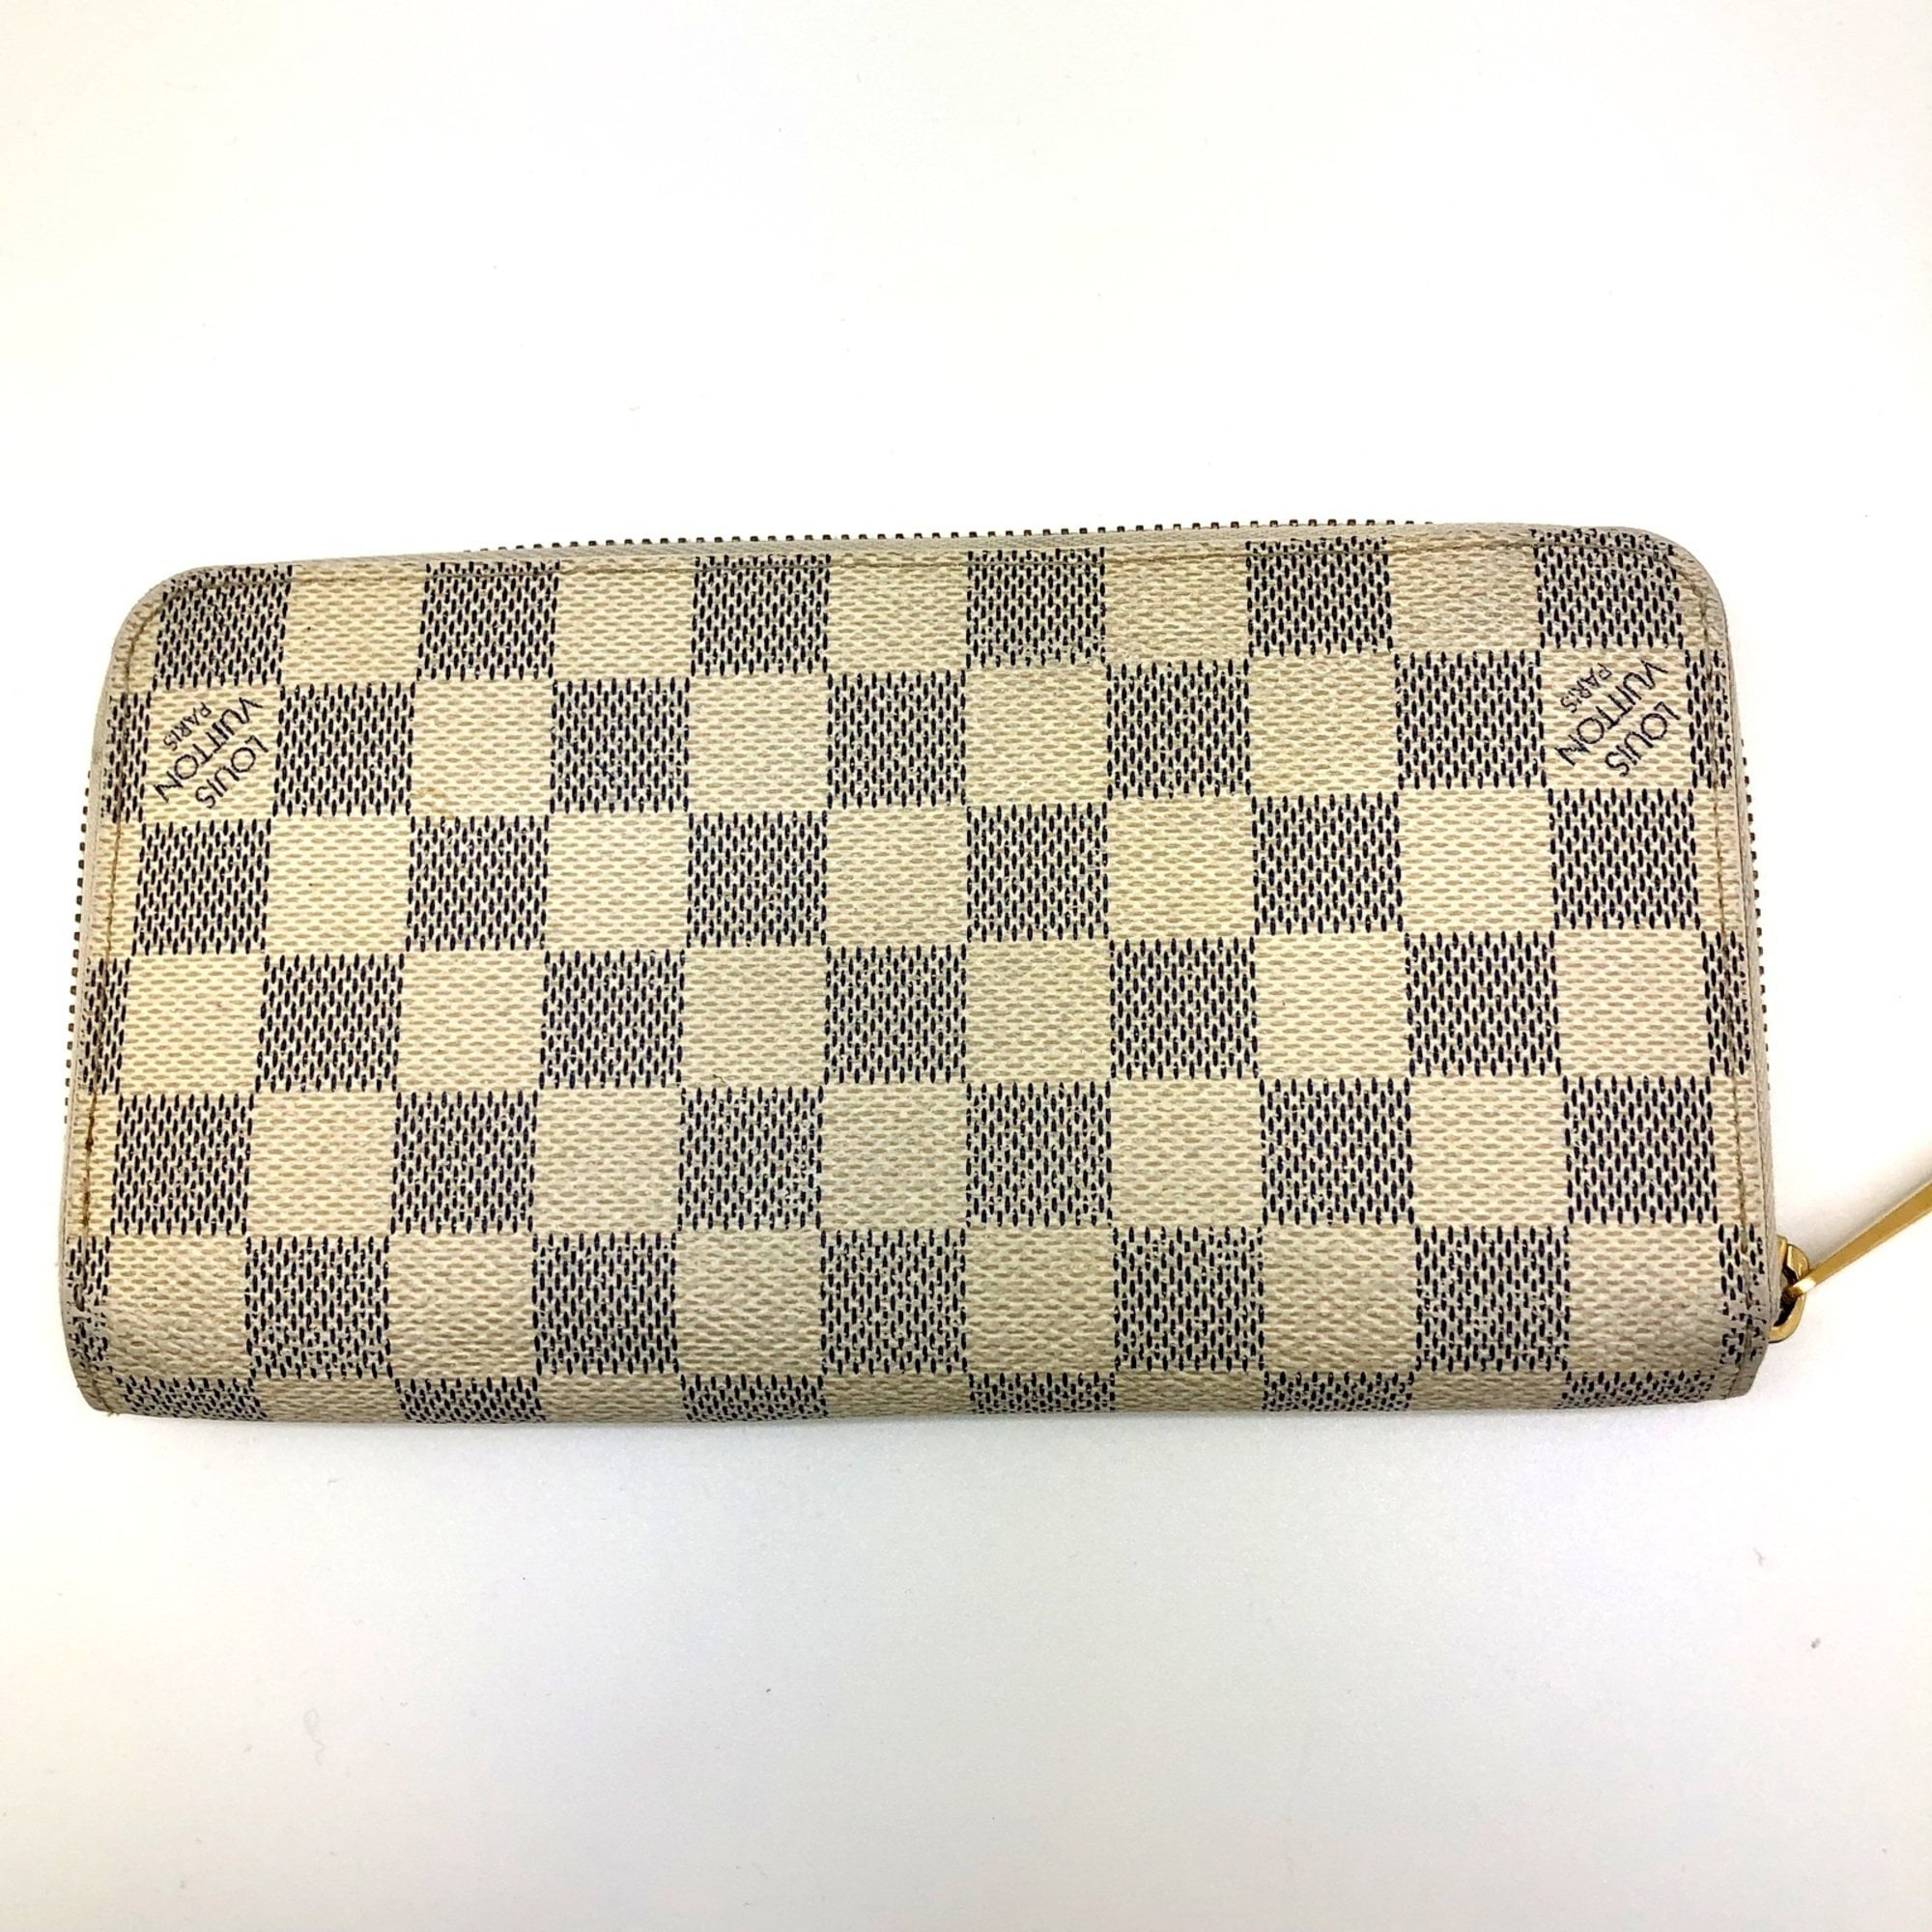 LOUIS VUITTON LOUIS VUITTON Zippy wallet Round purse M69215 Mahina leather  White Used Women LV M69215｜Product Code：2104102065016｜BRAND OFF Online Store